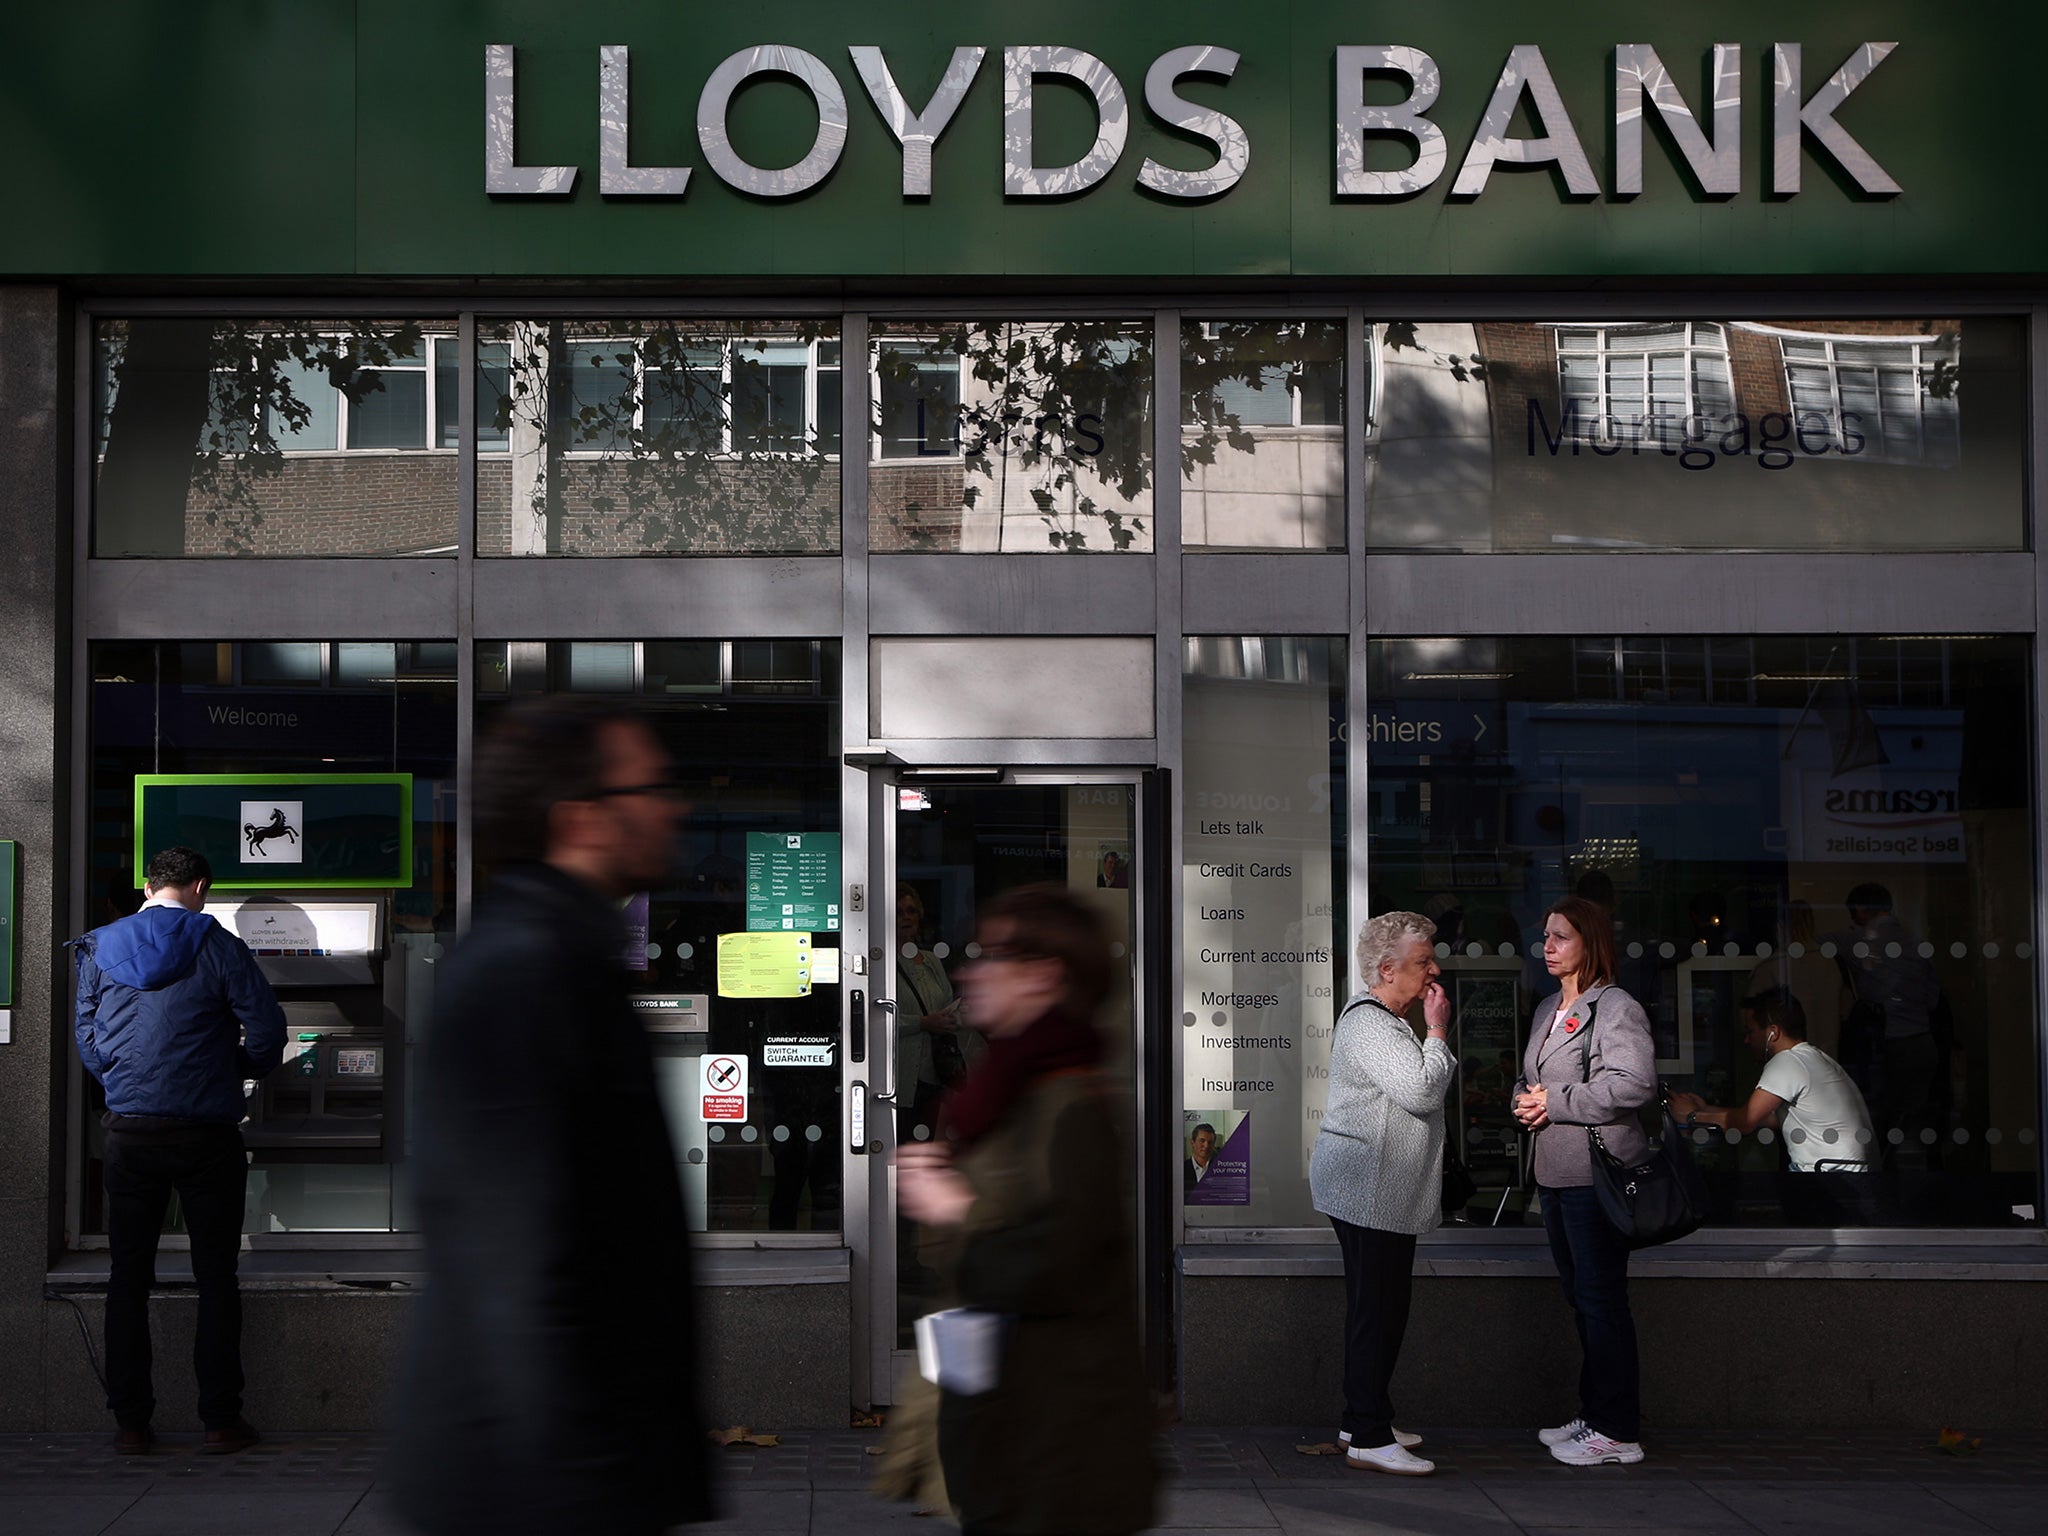 Under Lloyds’ bailout terms with the Government, it has to fund any of the overheads incurred in returning the funds to the taxpayer